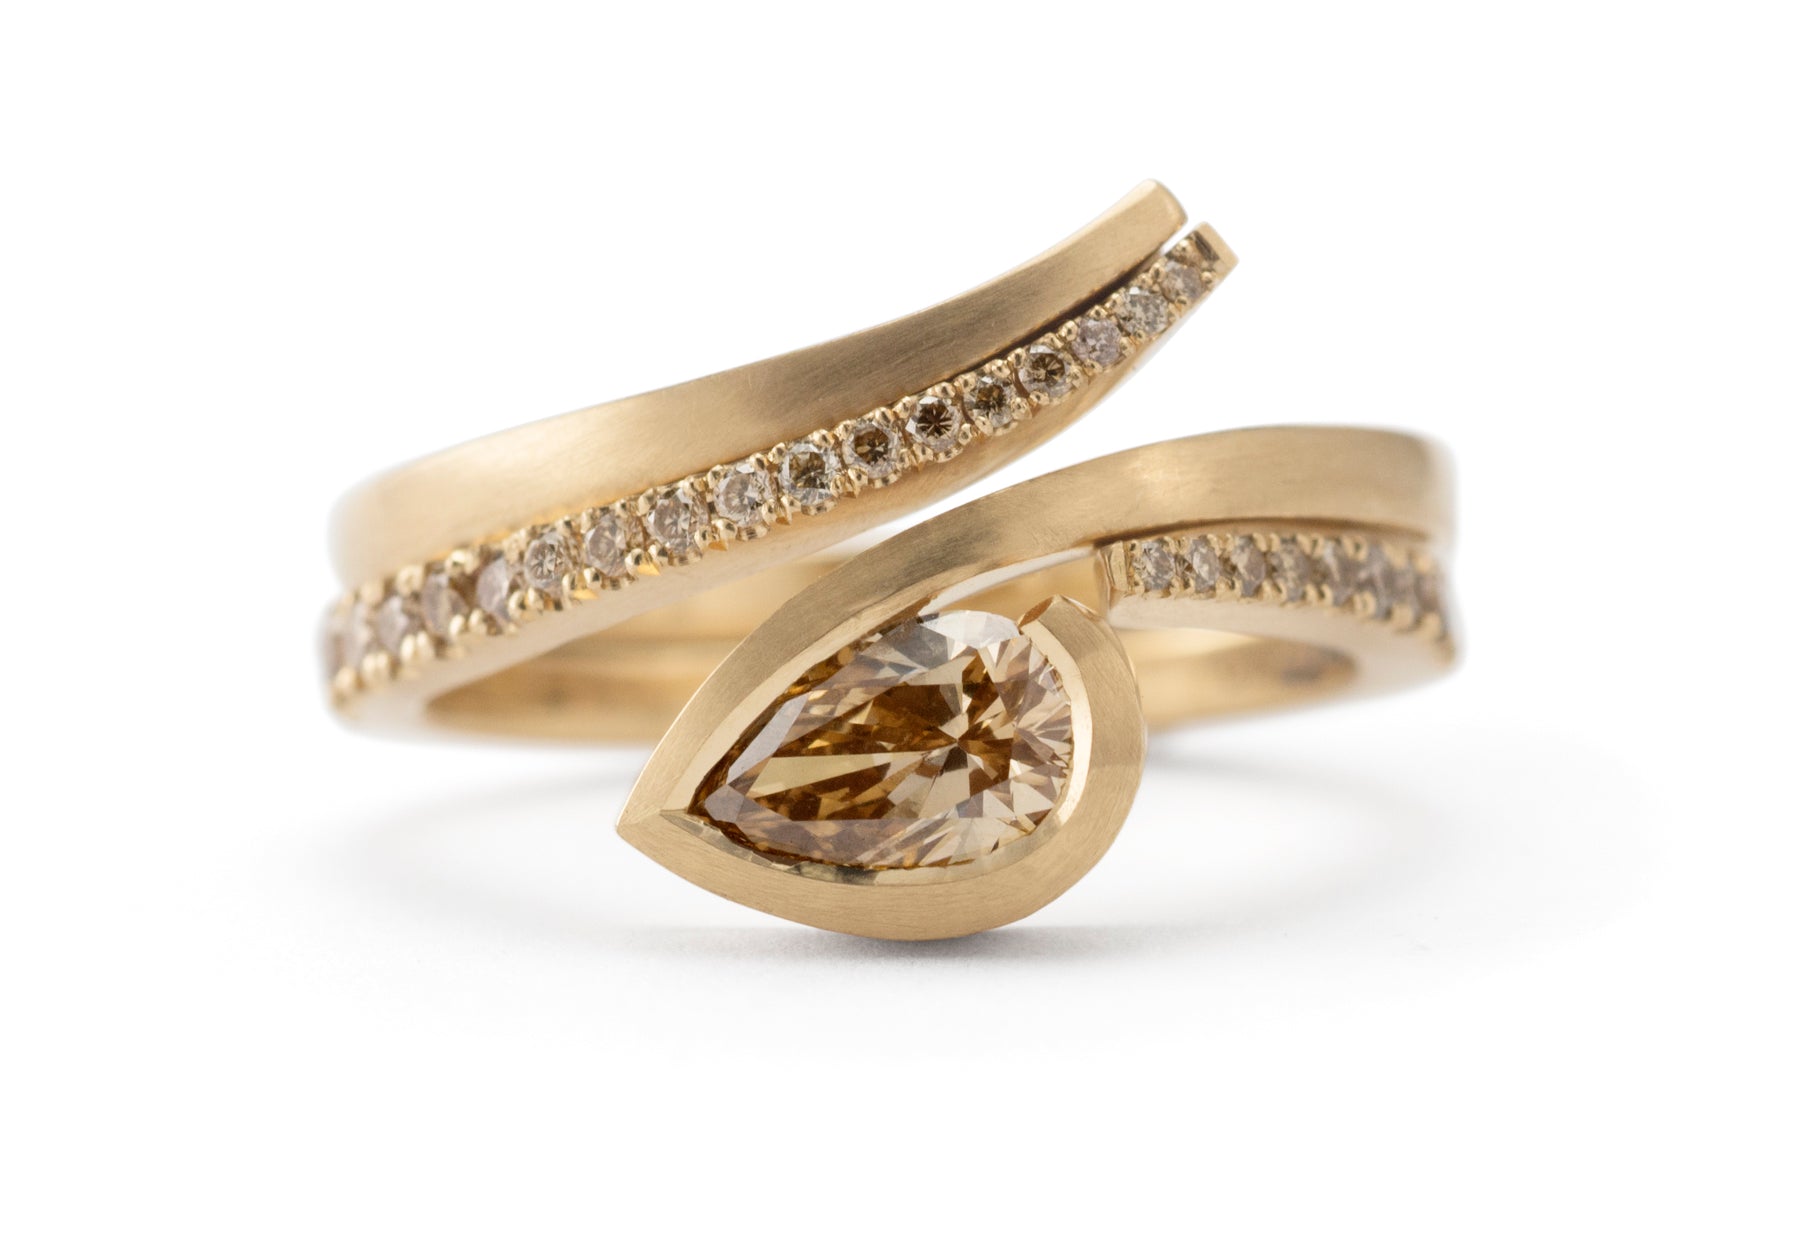 Twist cognac diamond rose gold engagement ring and cognac diamond pave set fitted wedding ring